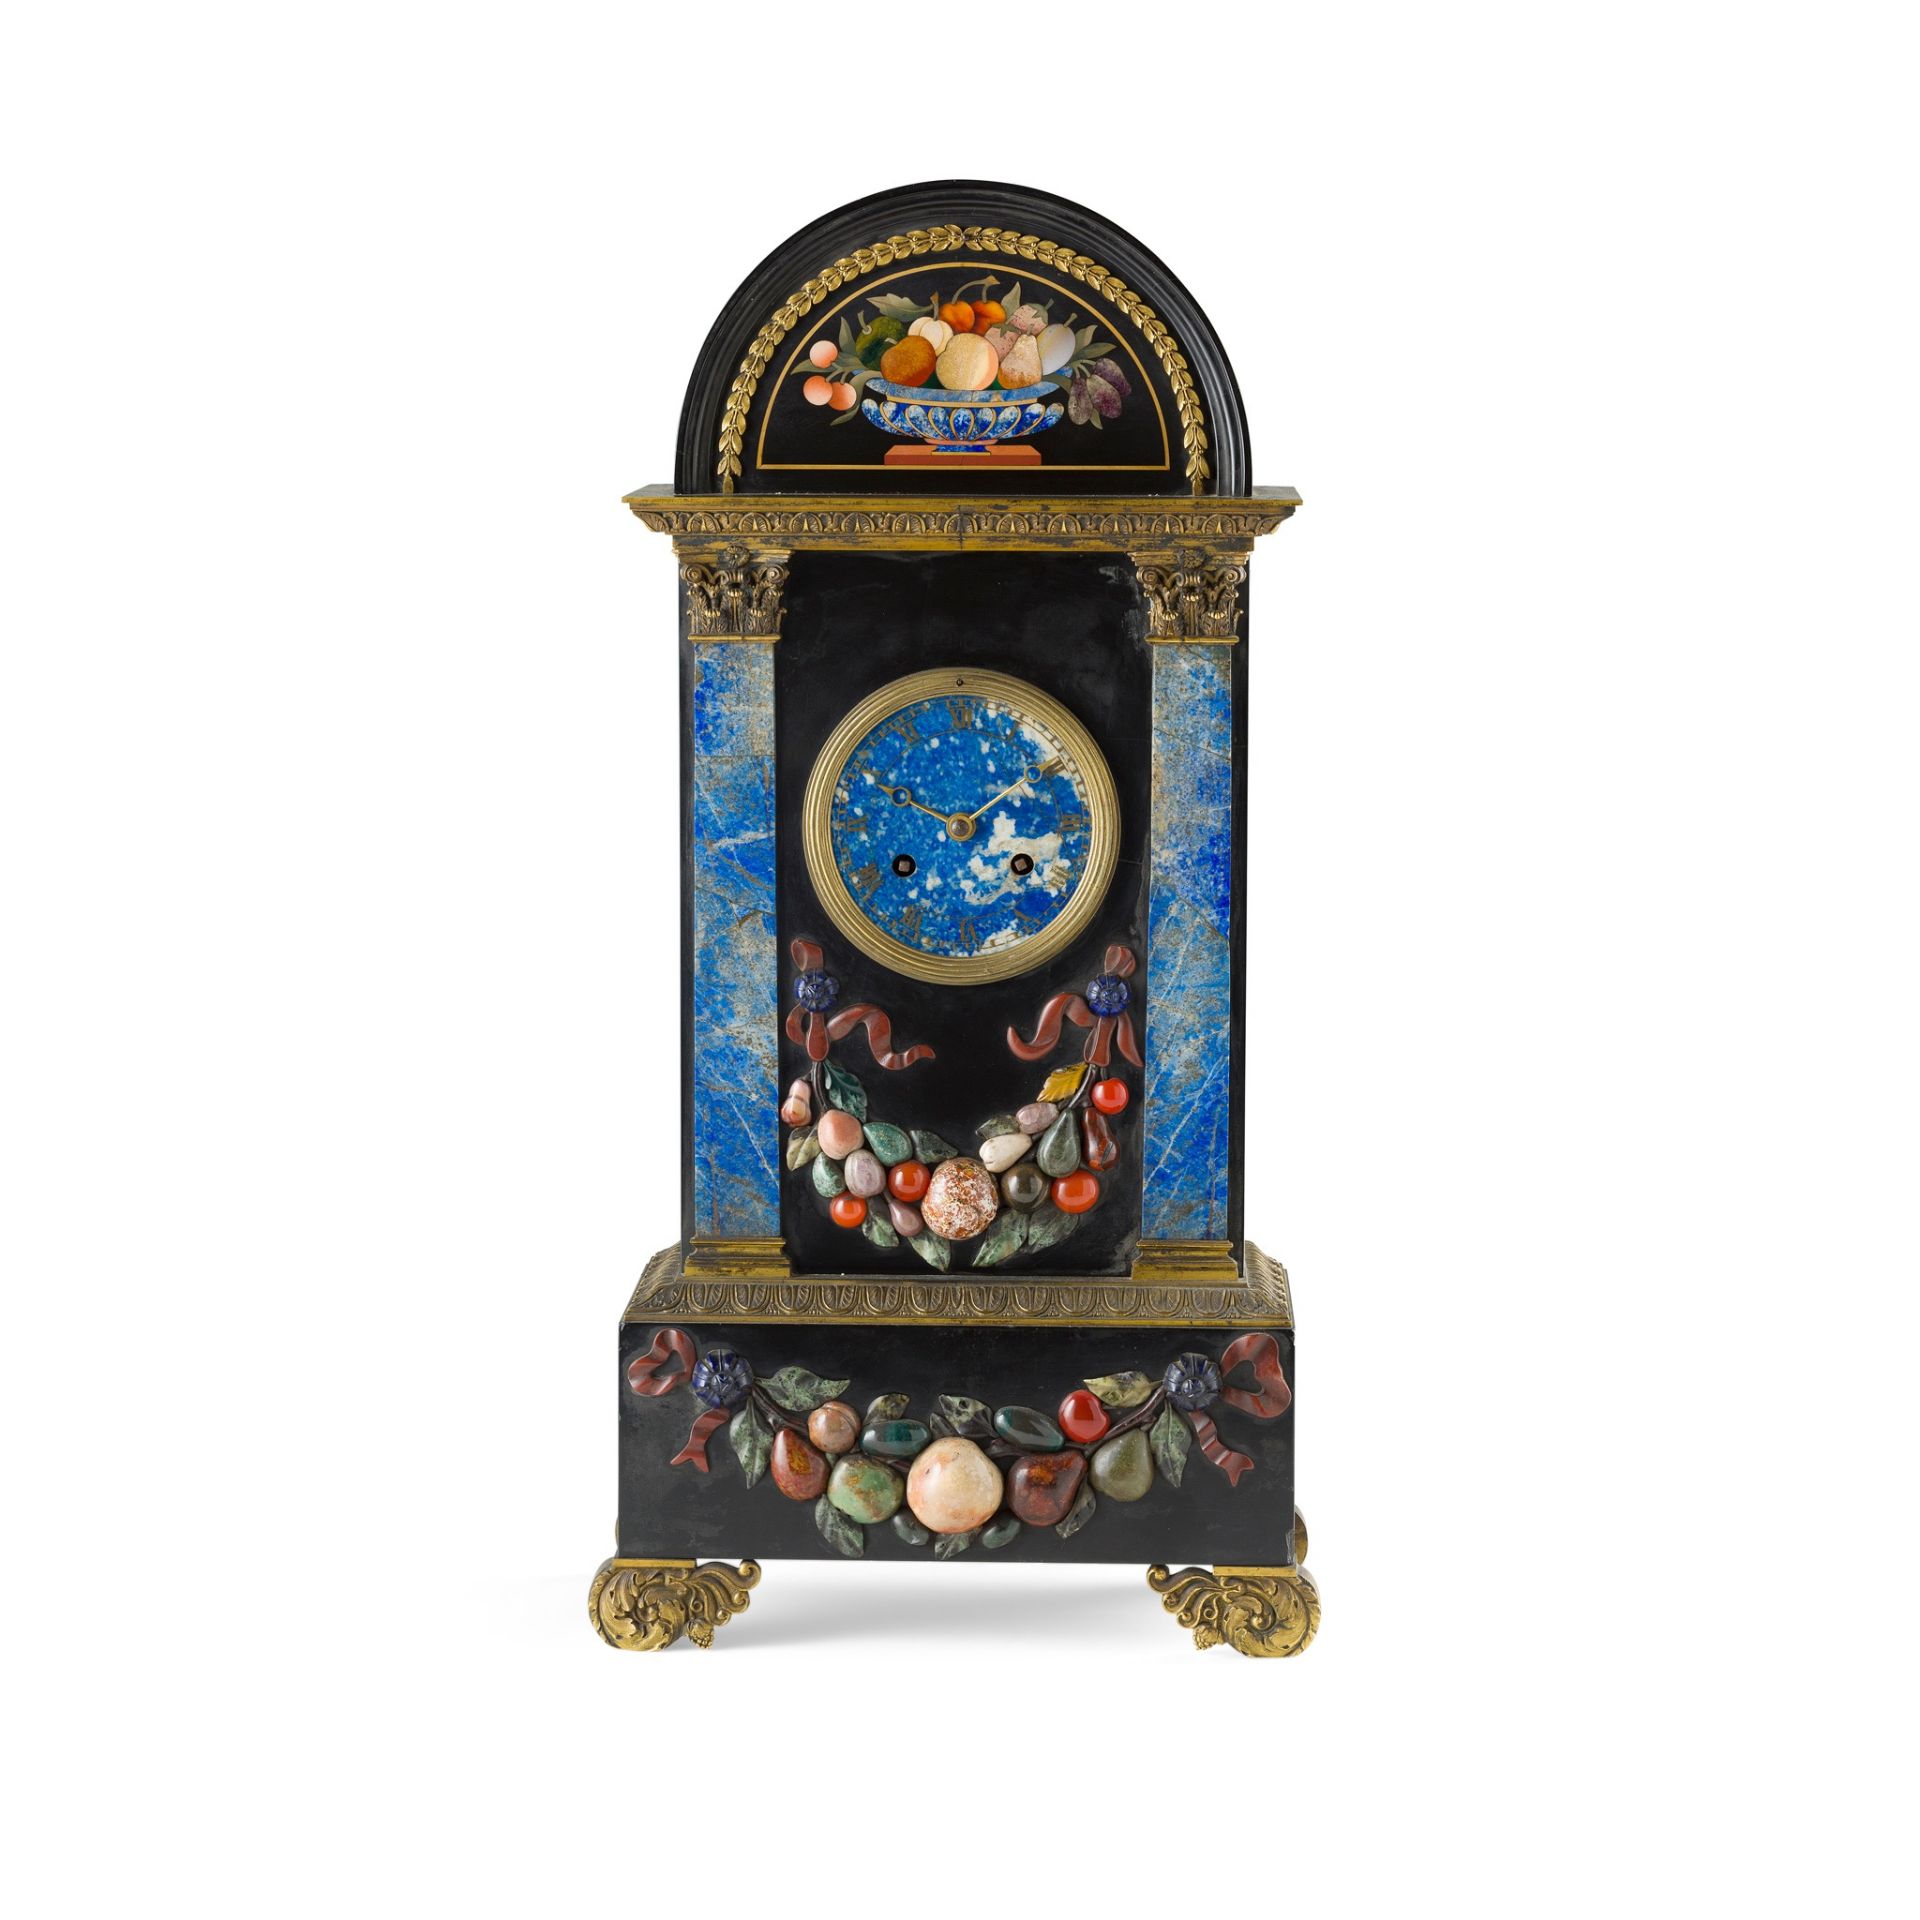 FRENCH FLORENTINE MARBLE AND PIETRA DURA MANTEL CLOCK, BY HUNZIKER, PARIS EARLY 19TH CENTURY - Image 2 of 3